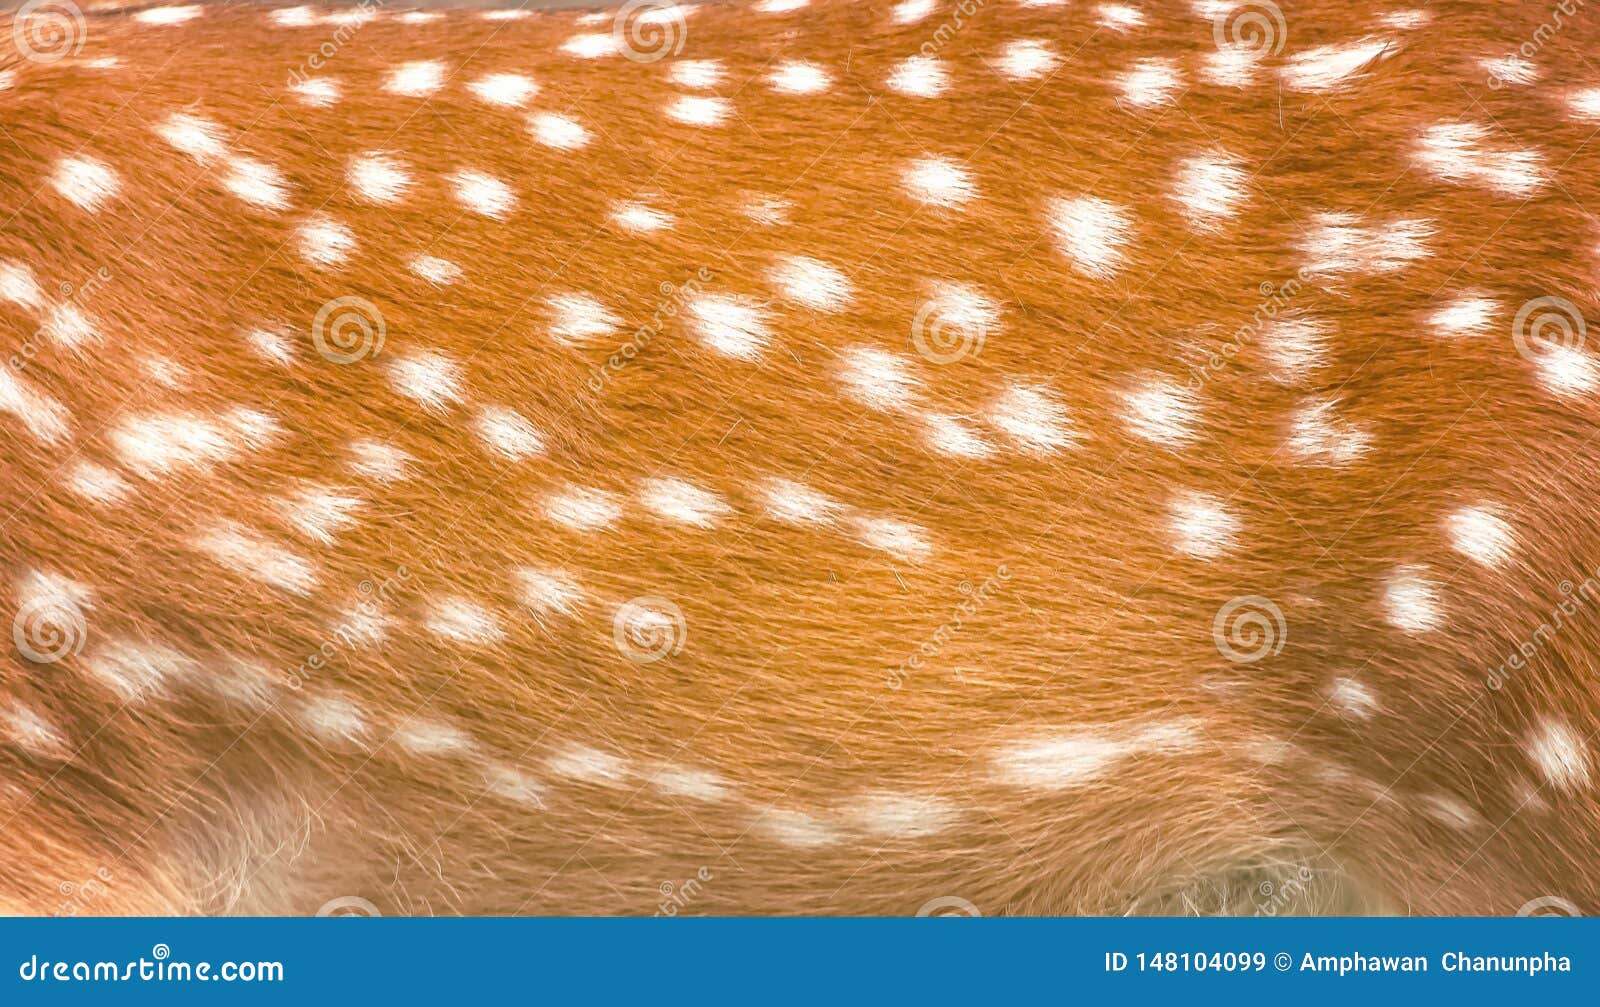 Texture Beautiful Skin of Dear , Nature Animal Body and Fur Patterns with  Brown and White Color Stripes for Background Stock Image - Image of  natural, patterns: 148104099